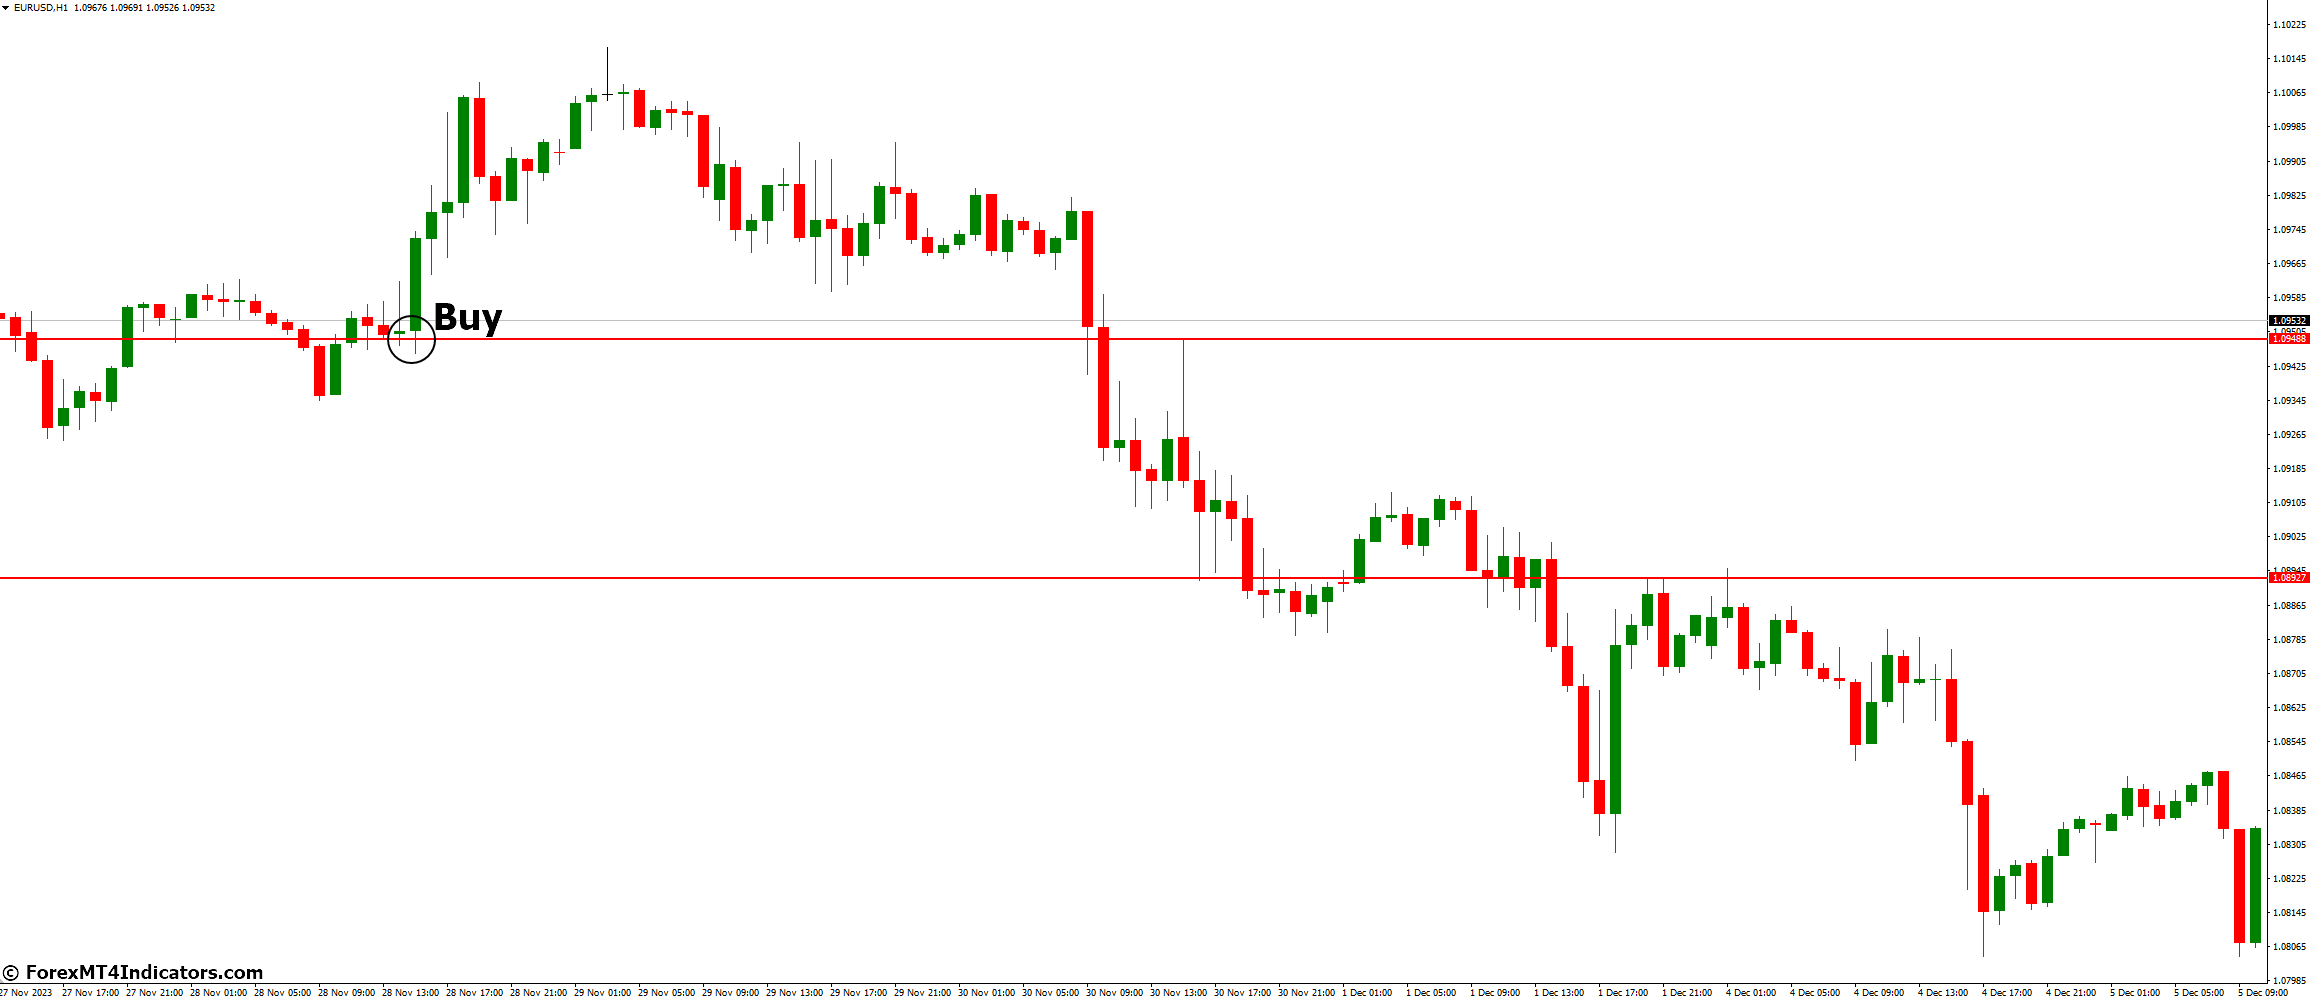 How to Trade with Daily Range Indicator - Buy Entry